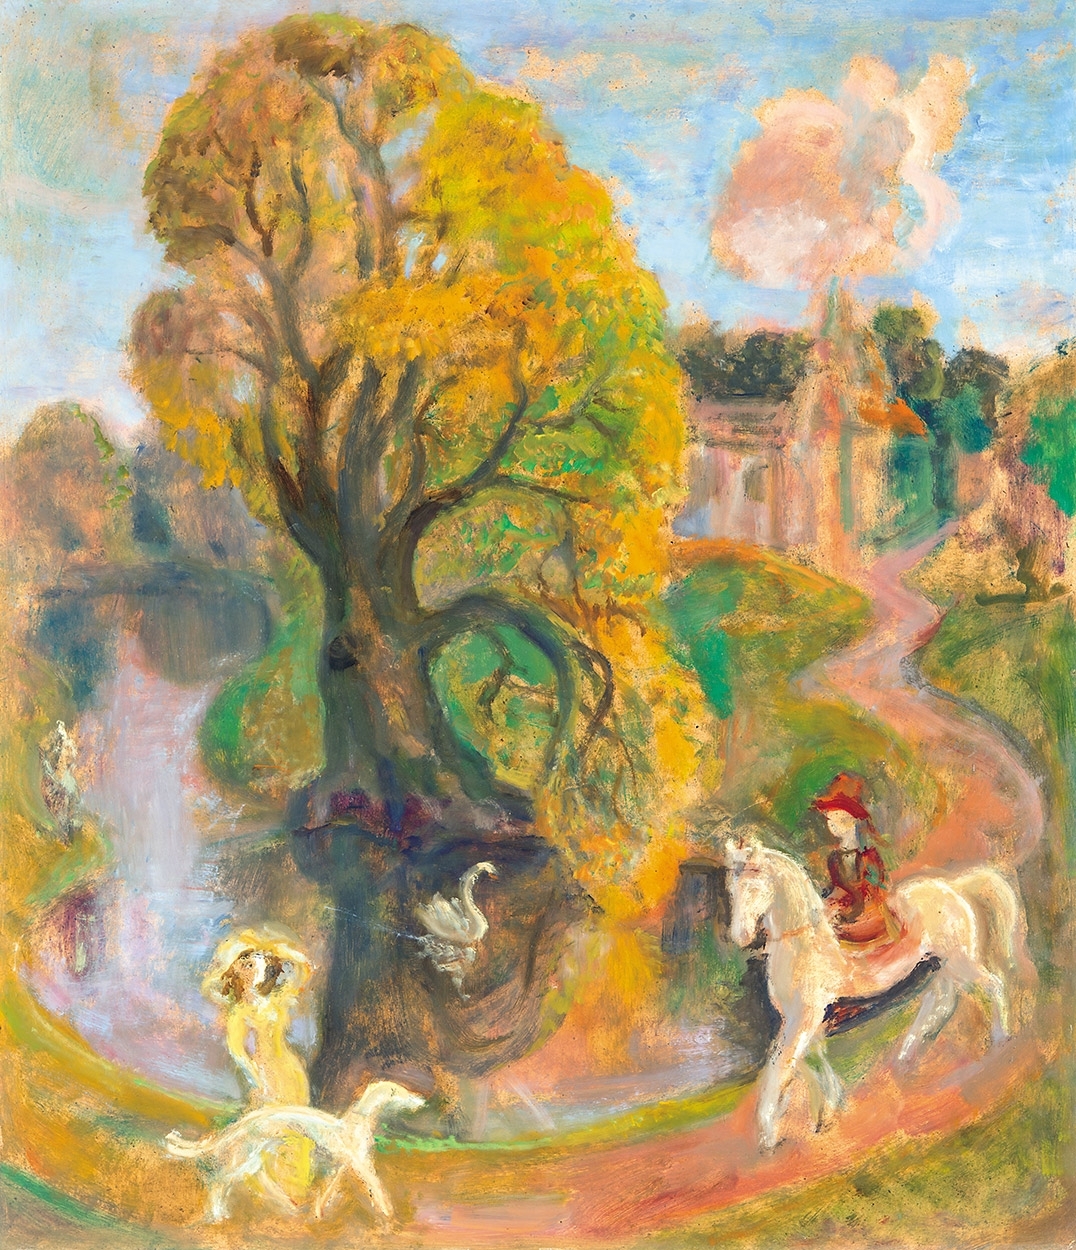 Szabó Vladimir (1905-1991) Walk in a Park (In the Count’s Park), 1986